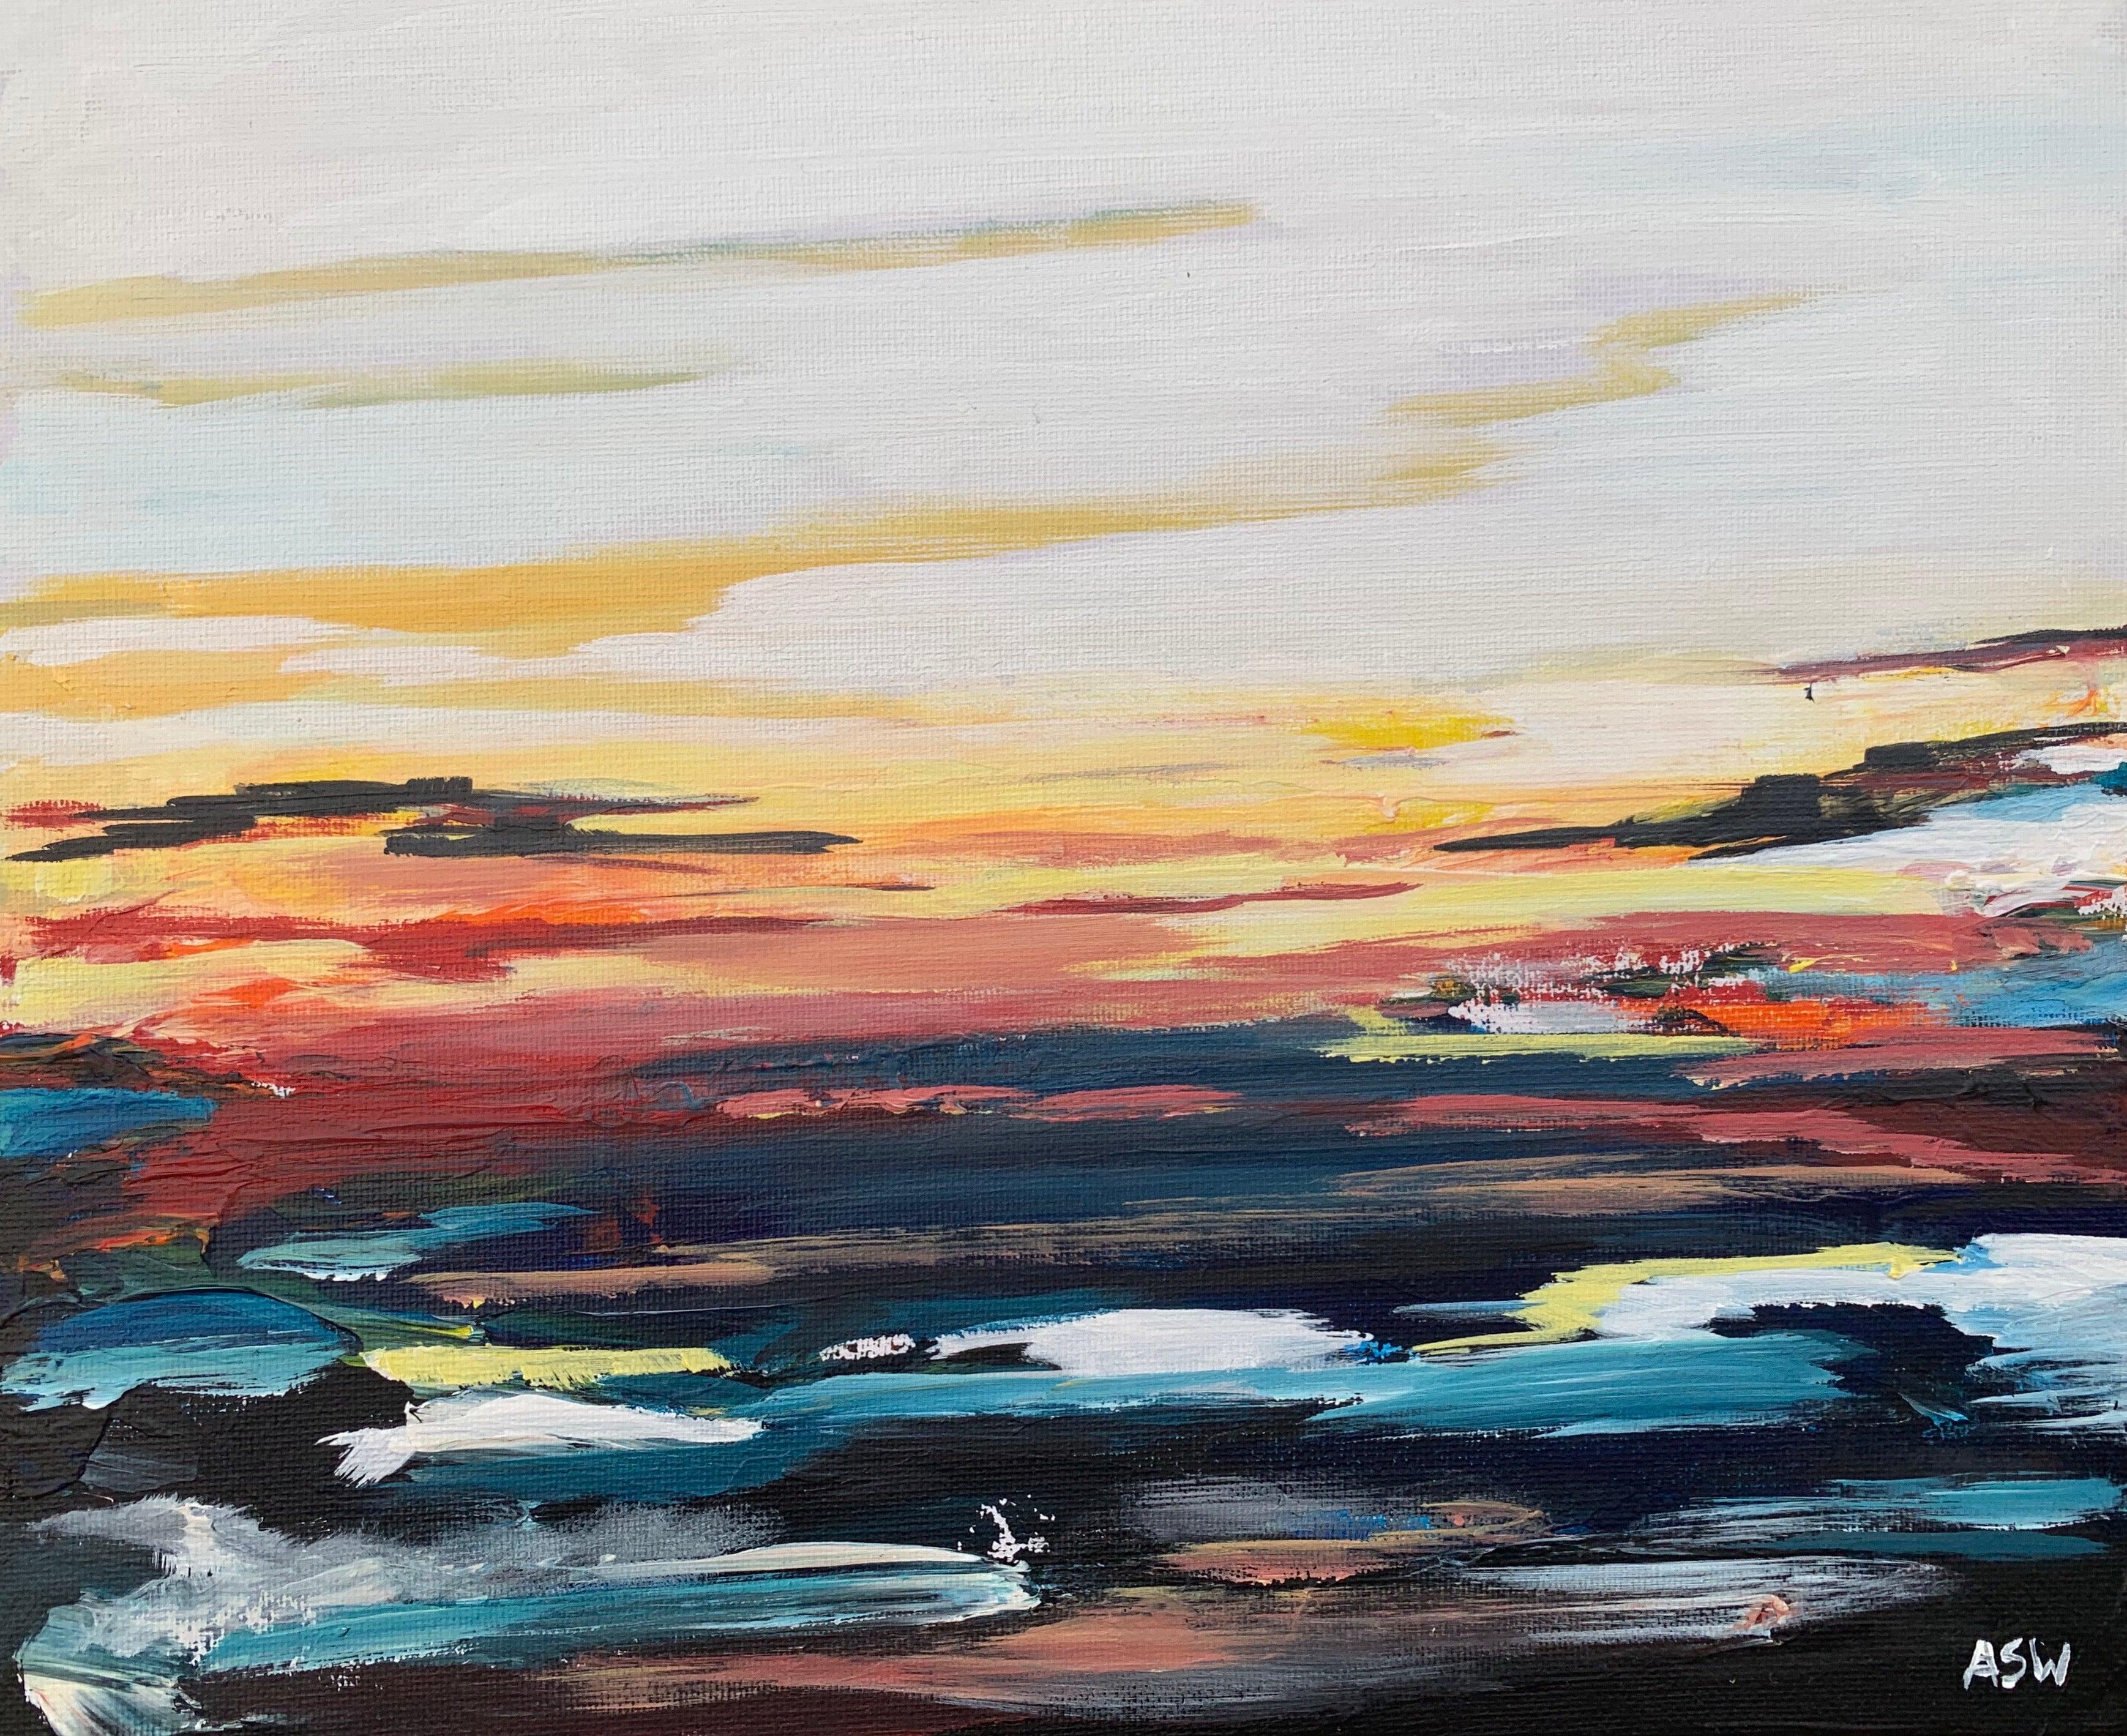 Colourful Abstract Seascape Sunset Study by Leading Contemporary British Artist For Sale 4